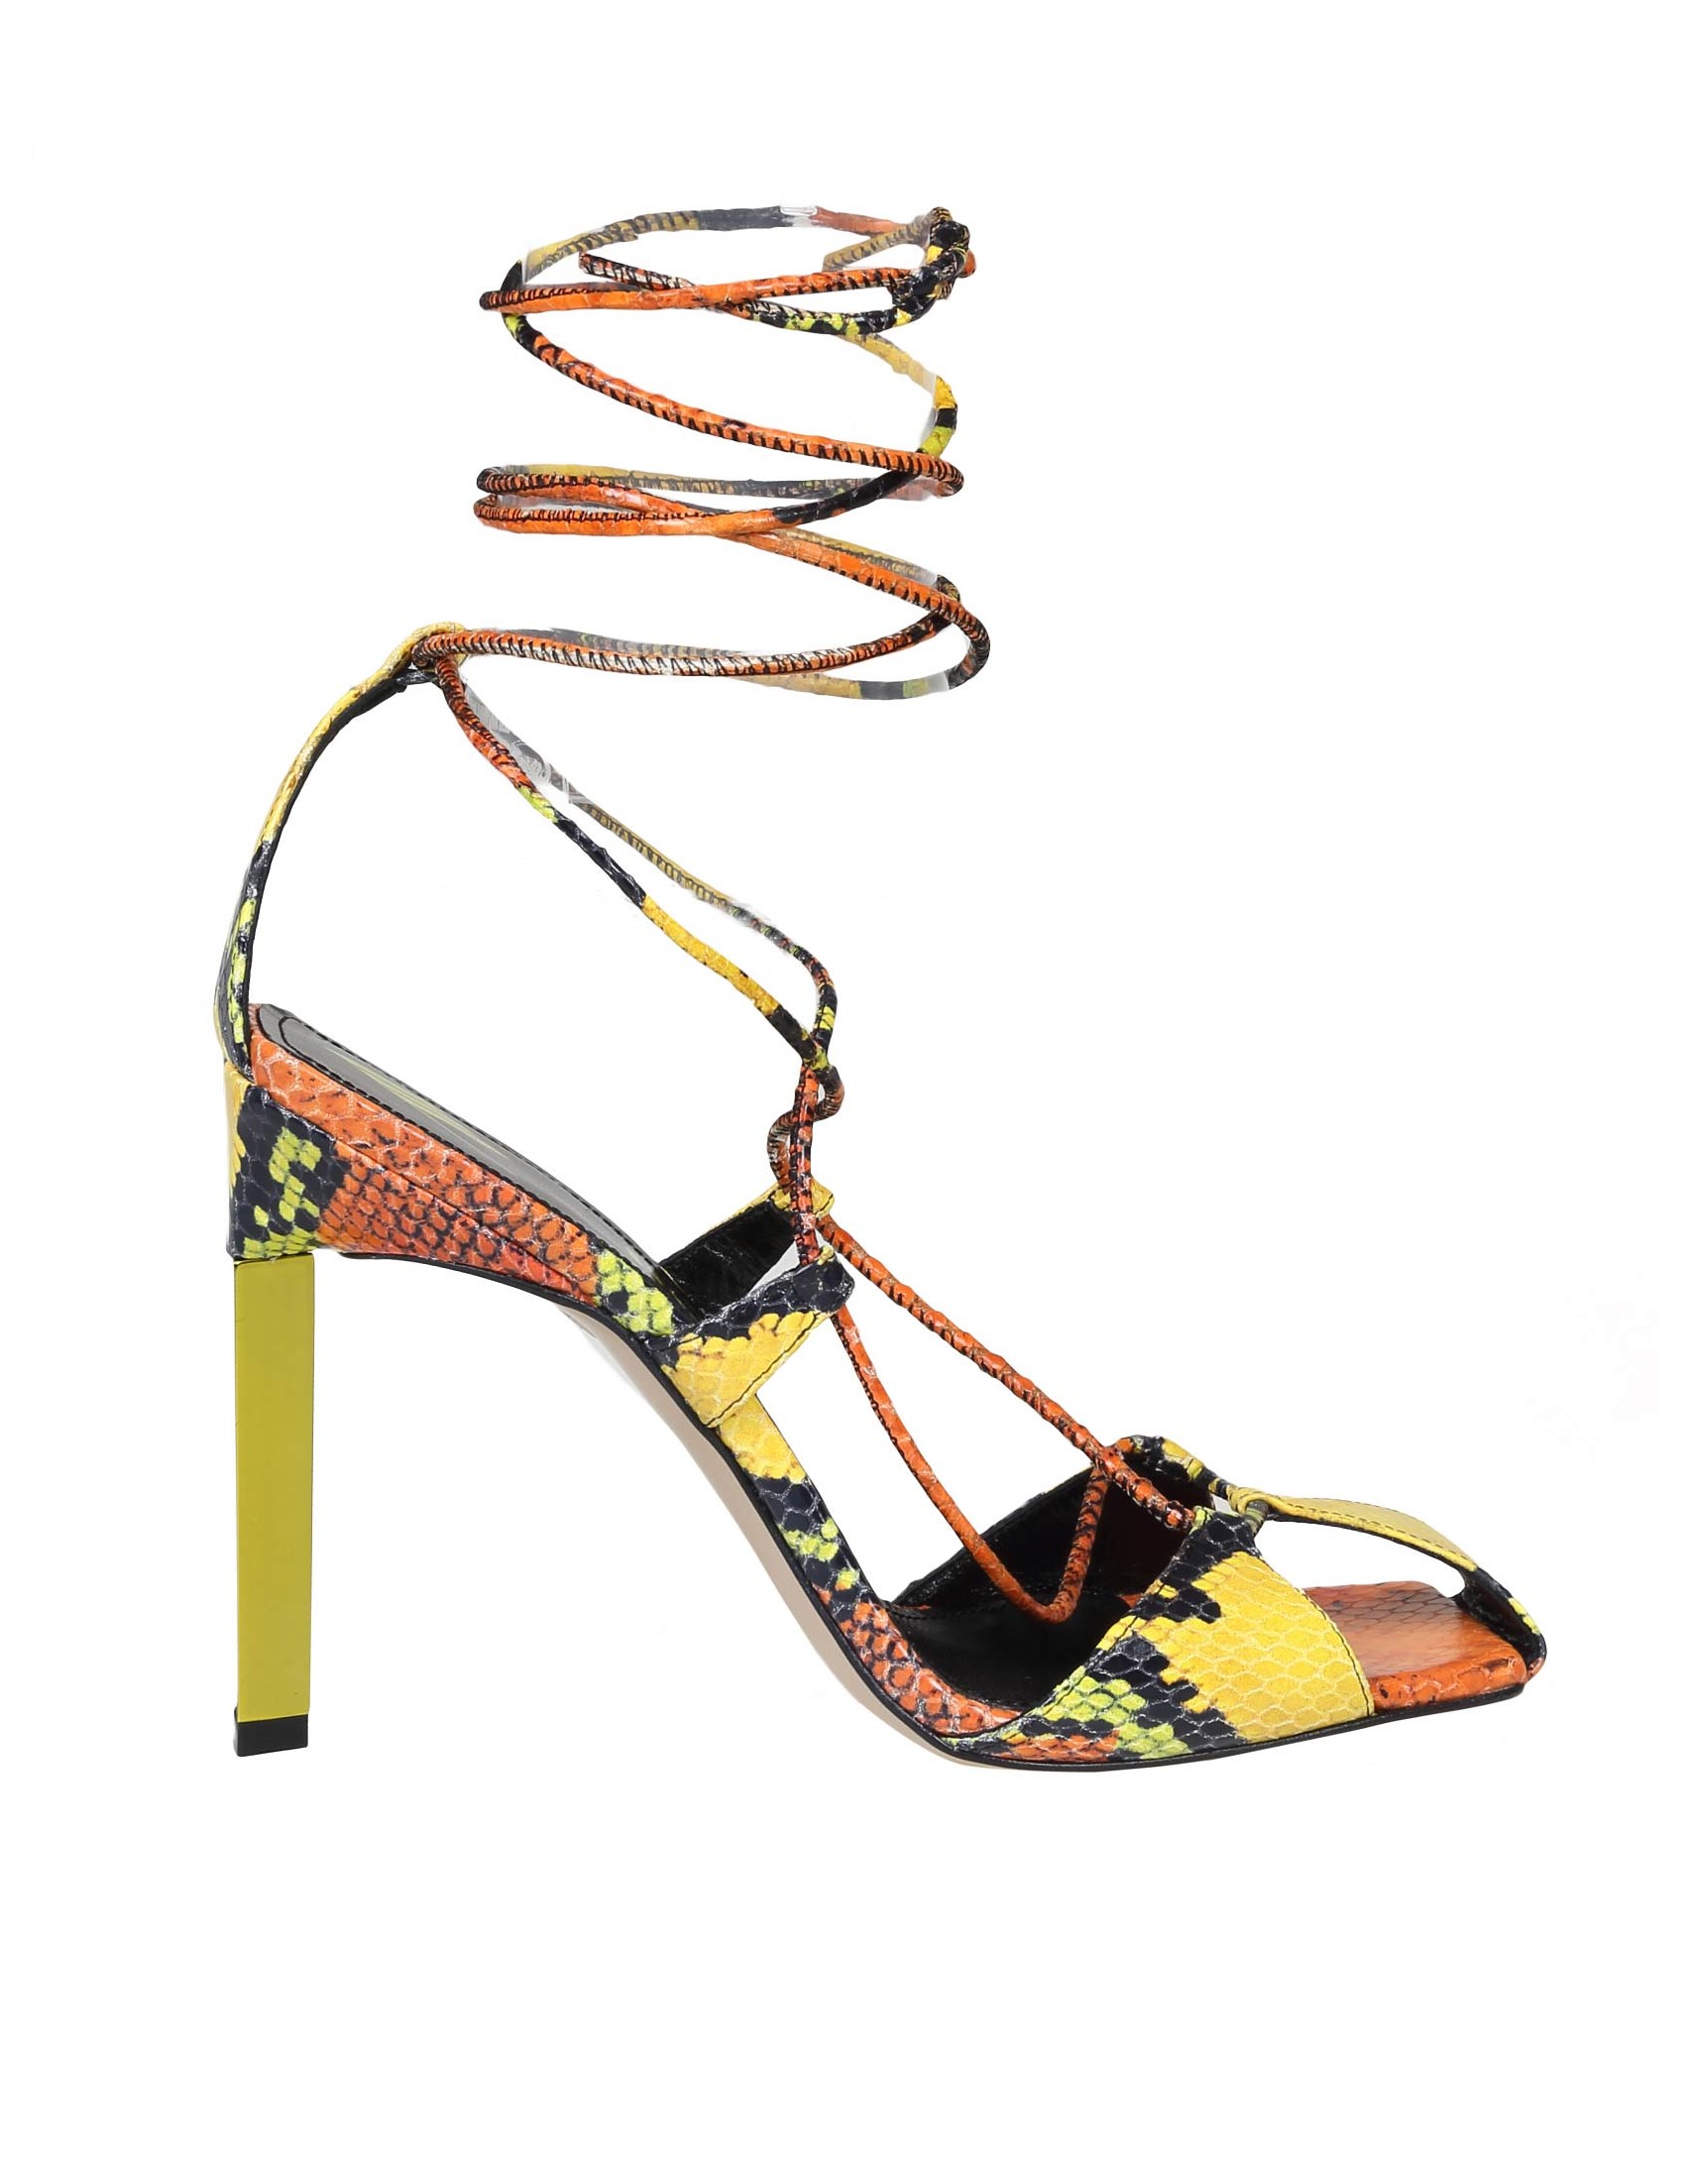 THE ATTICO ADELE SANDALS IN PYTHON PRINTED LEATHER